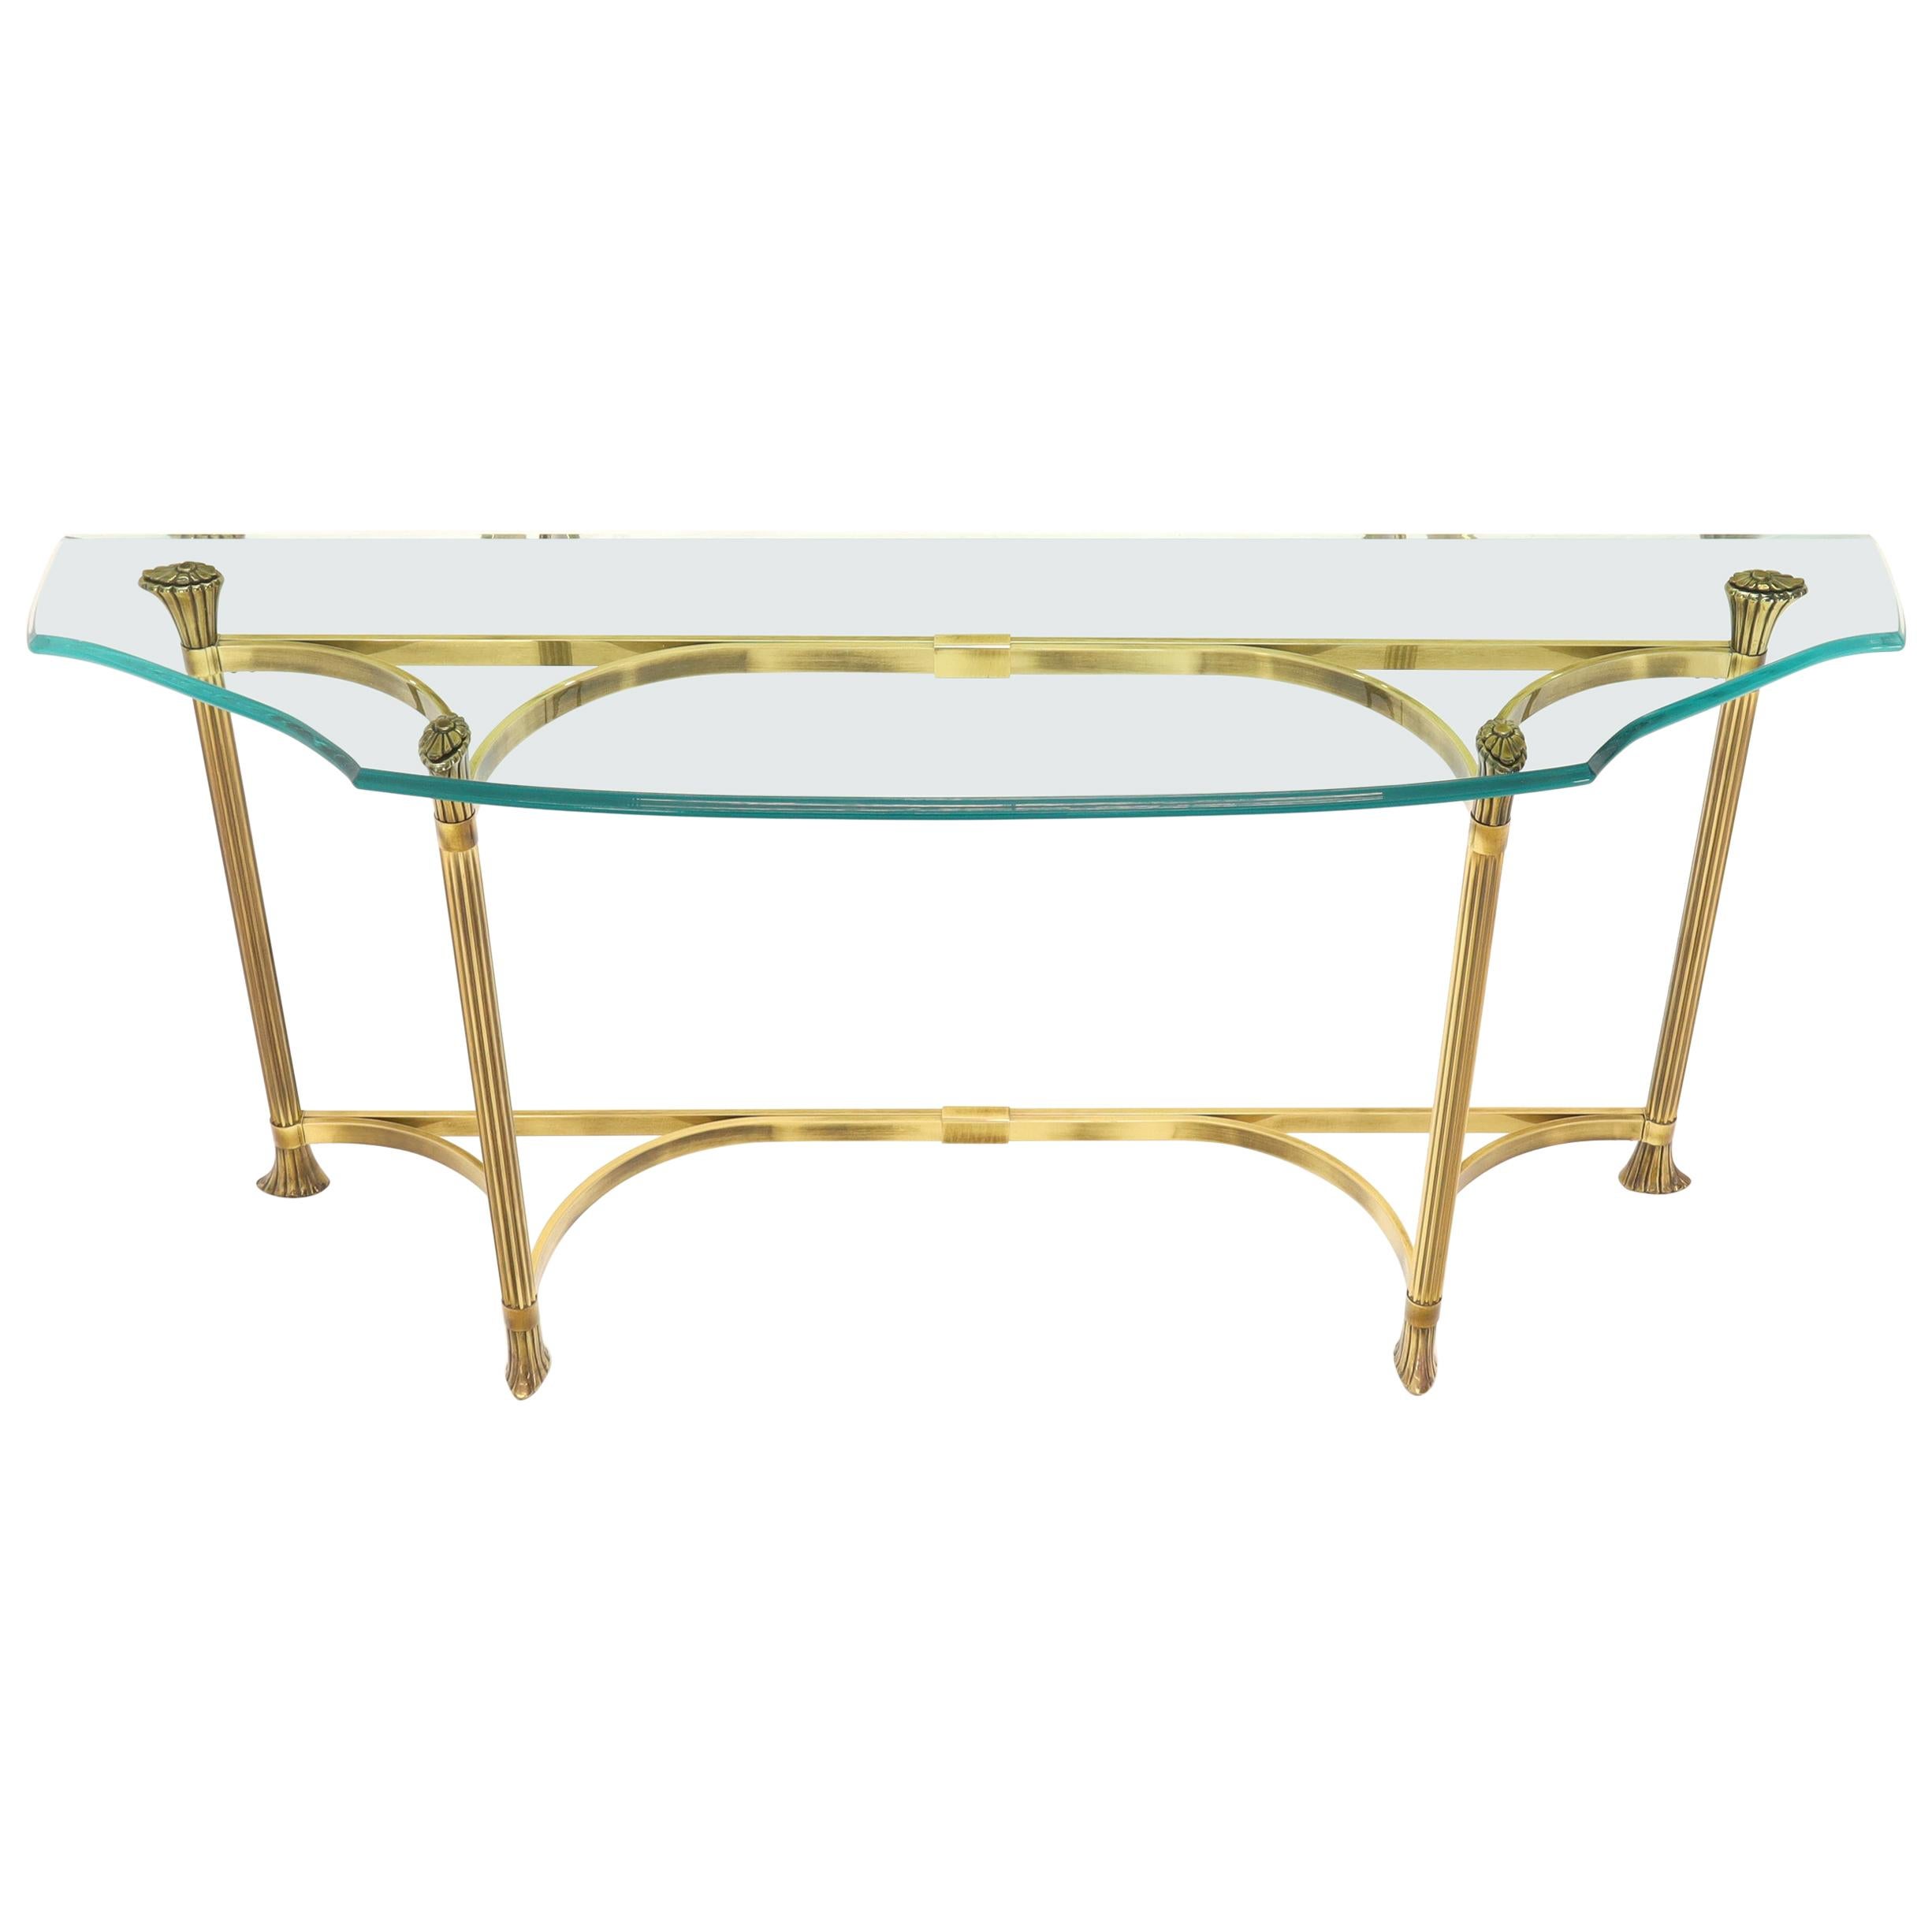 Bent Brass Base Curved Glass Top Figural Console Sofa Table